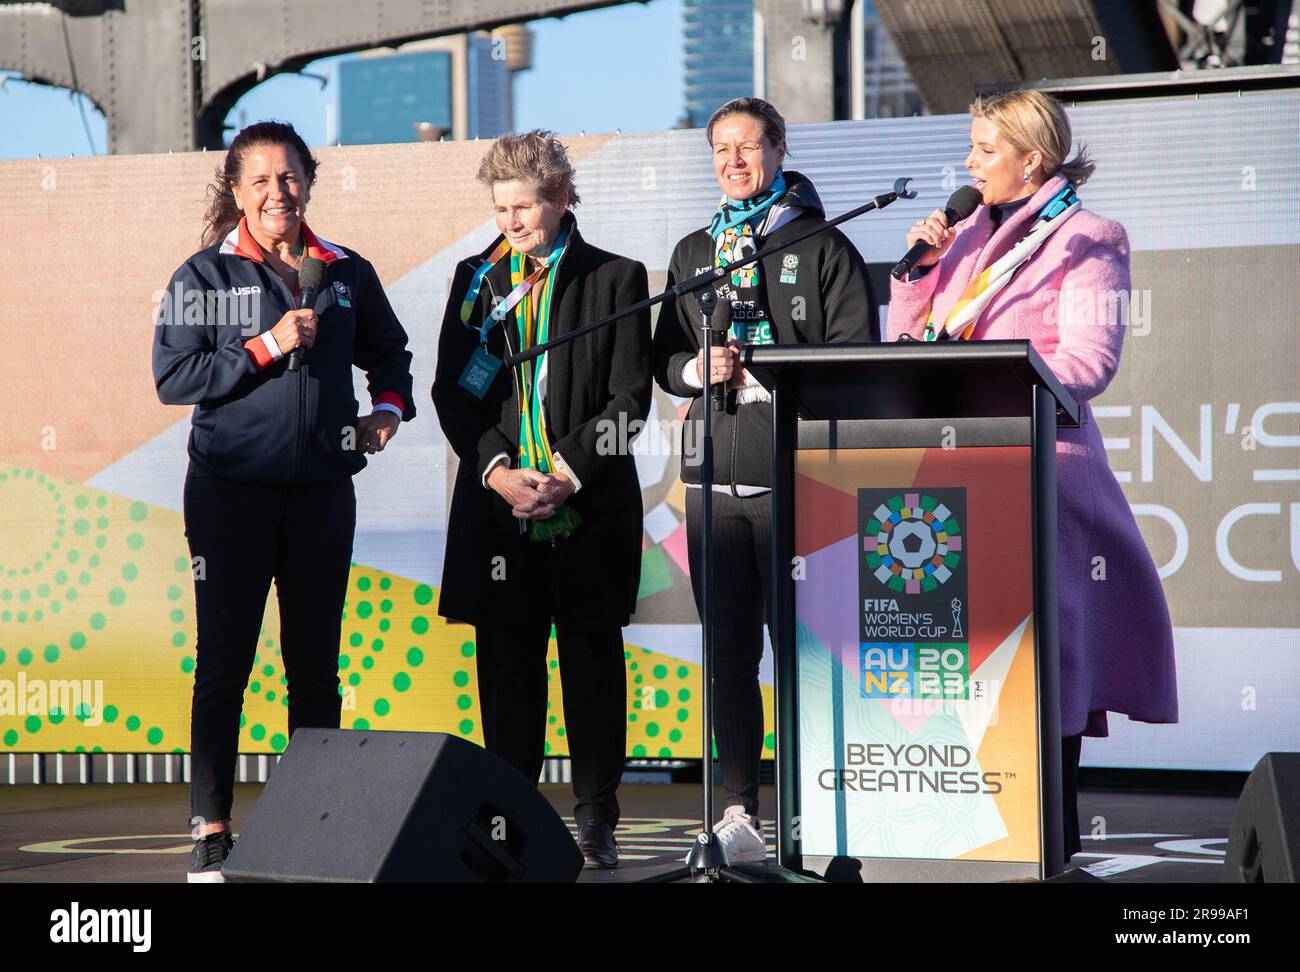 Sydney, Australia. 25th June, 2023. FIFA Legend and former football player of the United States Joy Fawcett(1st L), Australia's inaugural captain Julie Dolan (2nd L) and former New Zealand's football player Maia Jackman (2nd R) attend the event celebrating the 25-day countdown until the 2023 FIFA Women's World Cup on Sydney Harbor Bridge in Sydney, Australia, June 25, 2023. Credit: Hu Jingchen/Xinhua/Alamy Live News Stock Photo